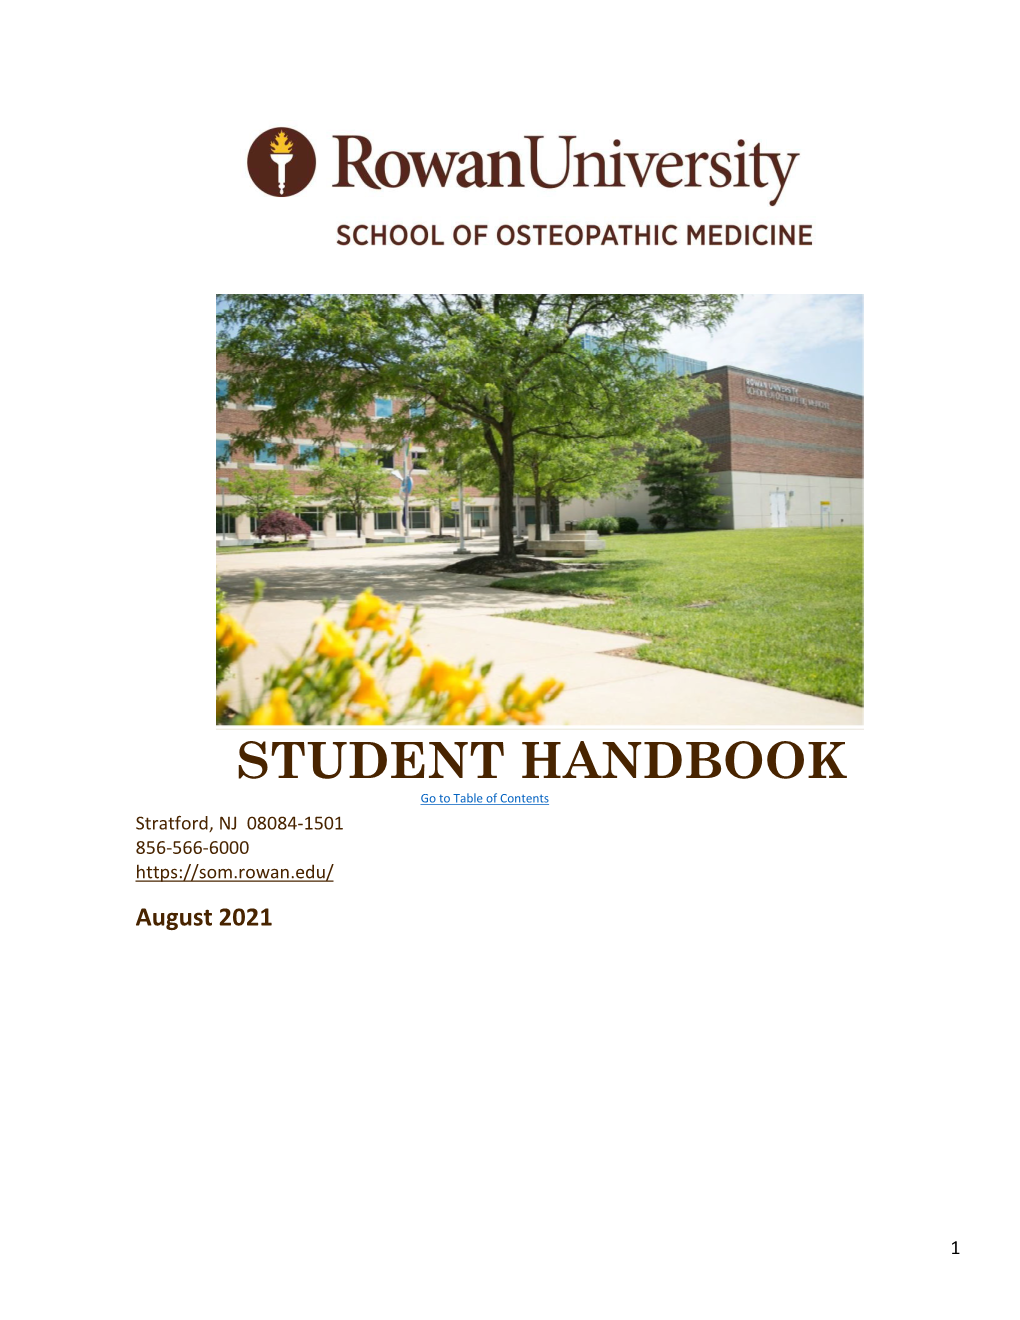 Rowansom Student Handbook Regarding the Rowansom Student Code of Conduct and Adhere to the Code of Ethics of the American Osteopathic Association